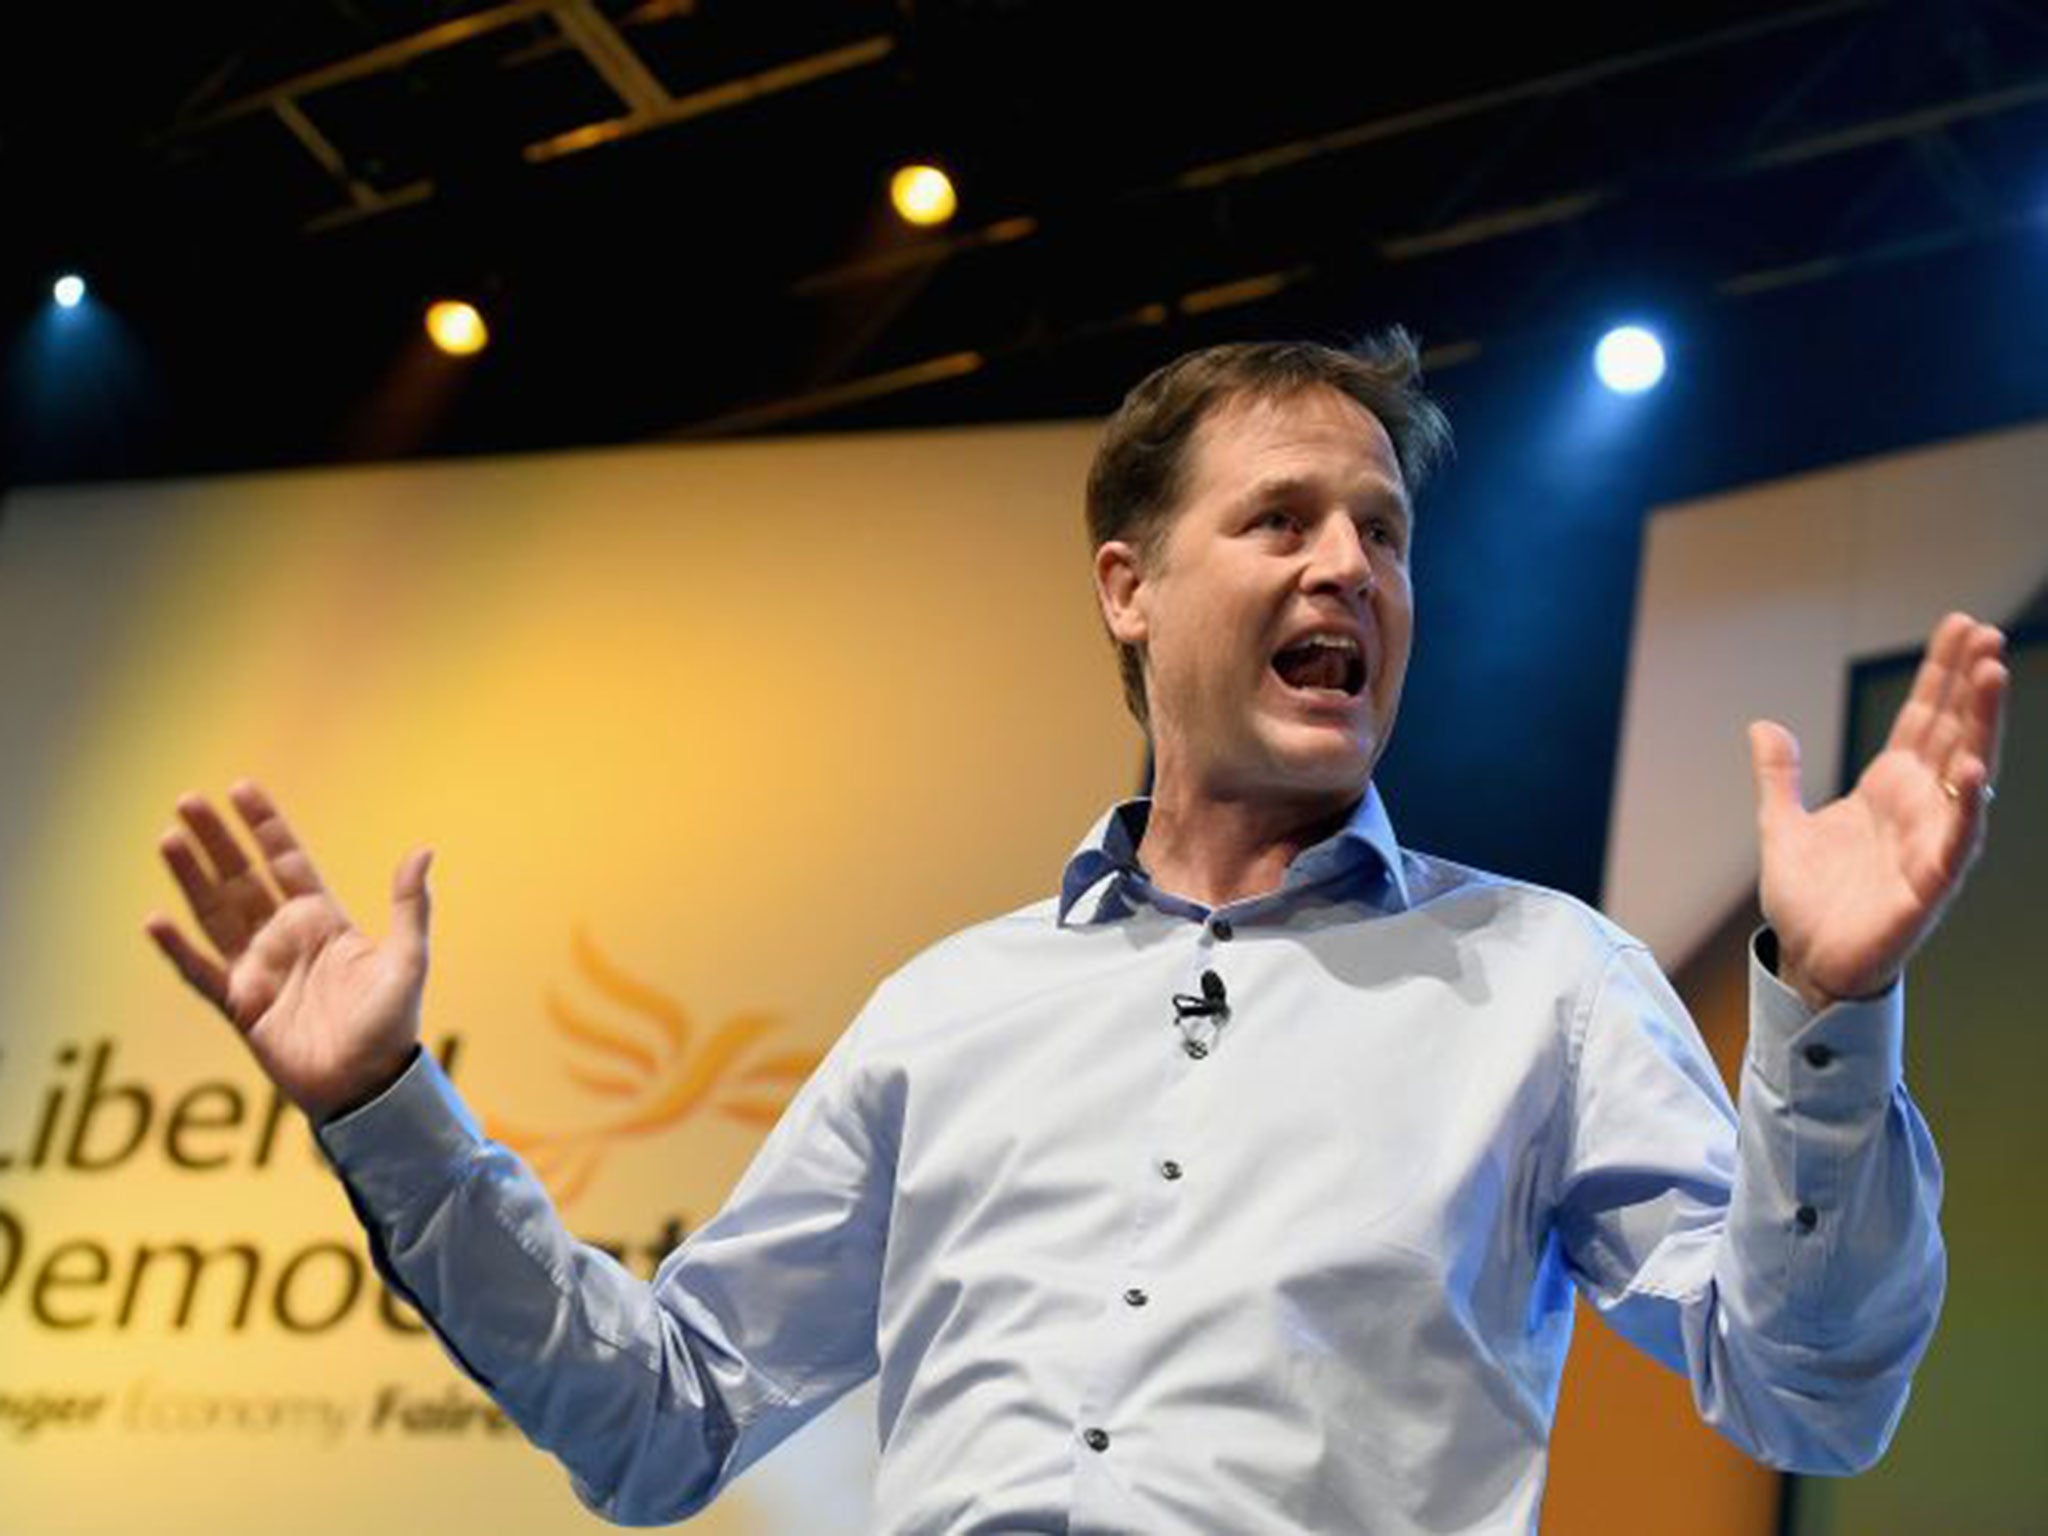 The Labour Party will highlight a list of "Lib Dem broken promises"